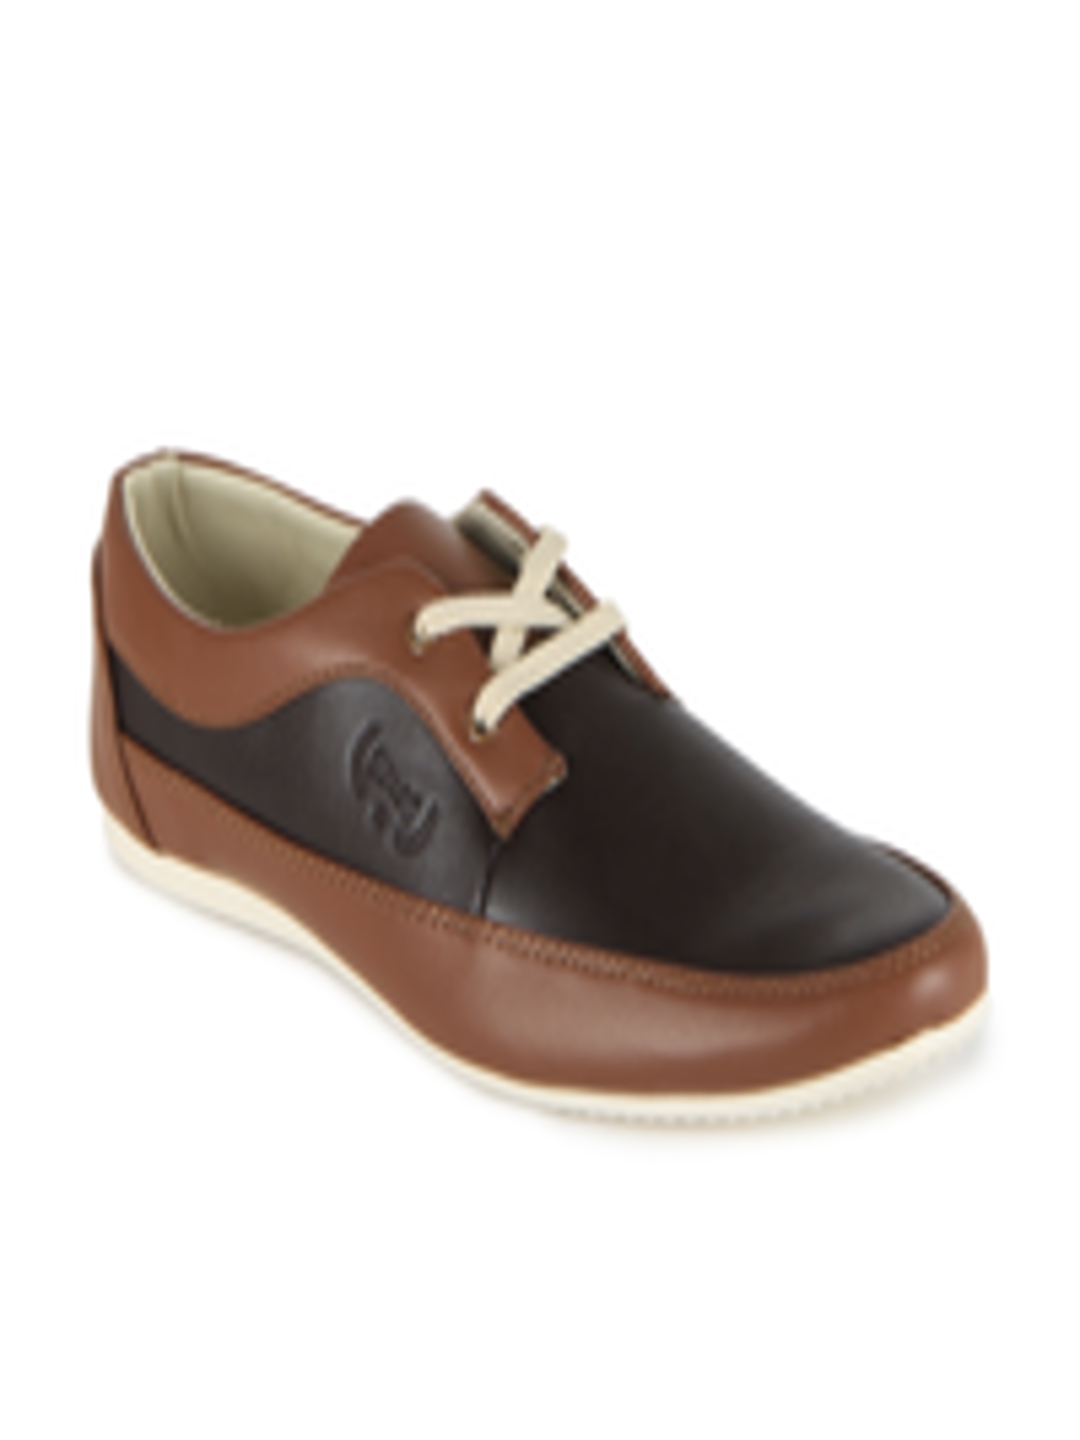 Buy Quads Men Brown Casual Shoes - Casual Shoes for Men 167254 | Myntra